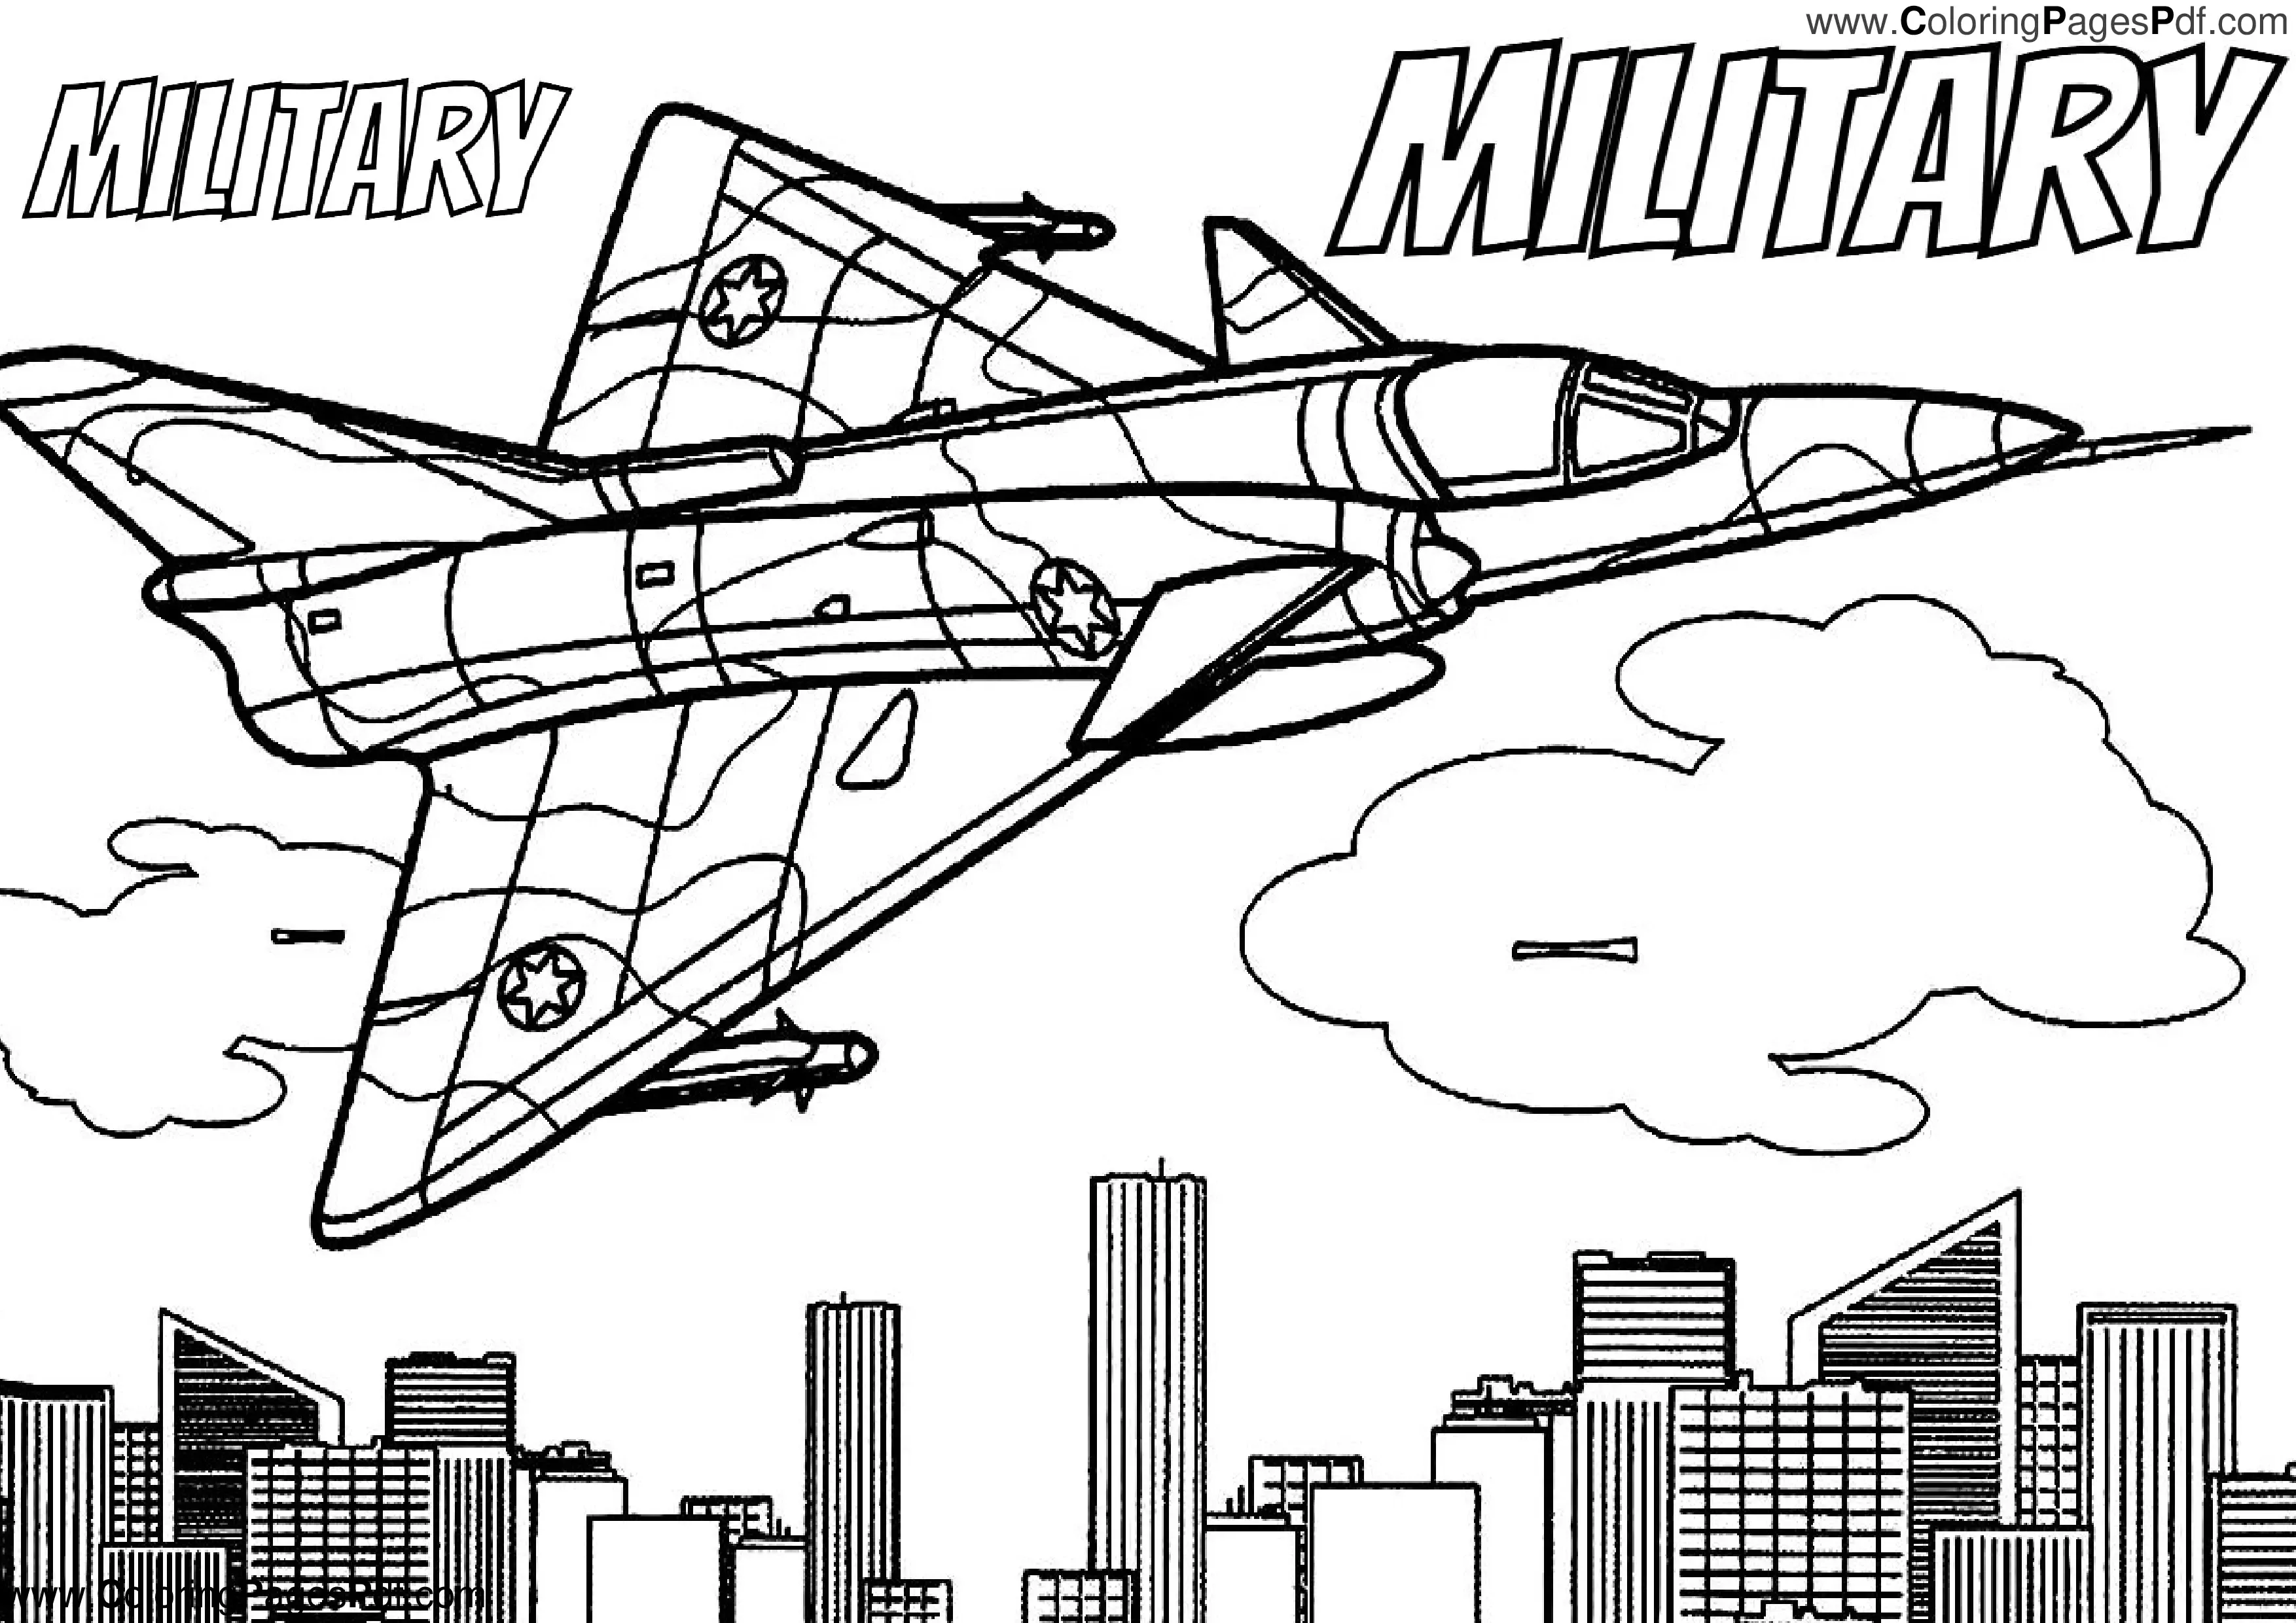 Military airplane coloring pages